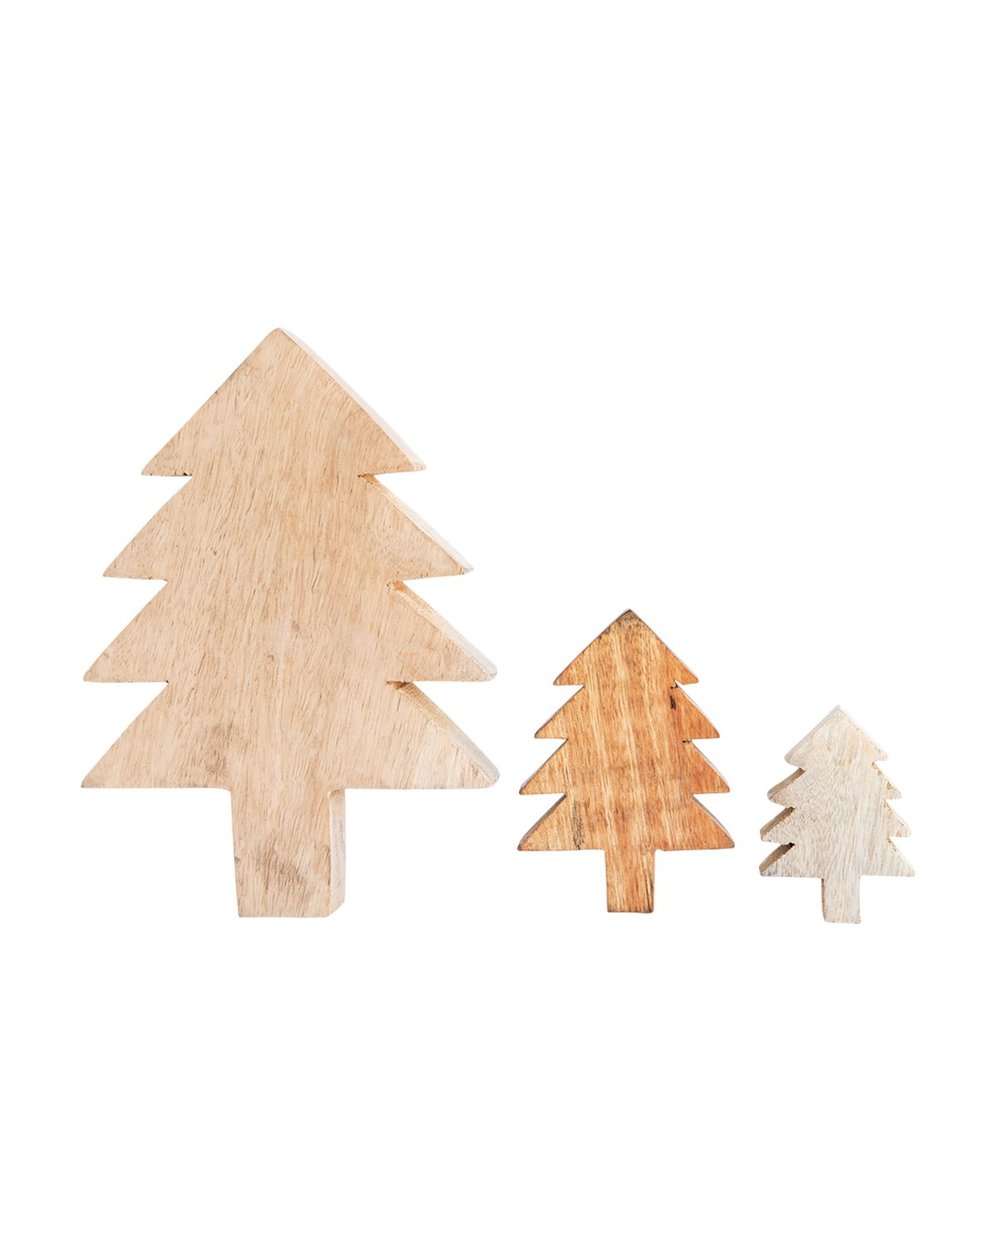 Wooden_Holiday_Tree_Object_1.jpg